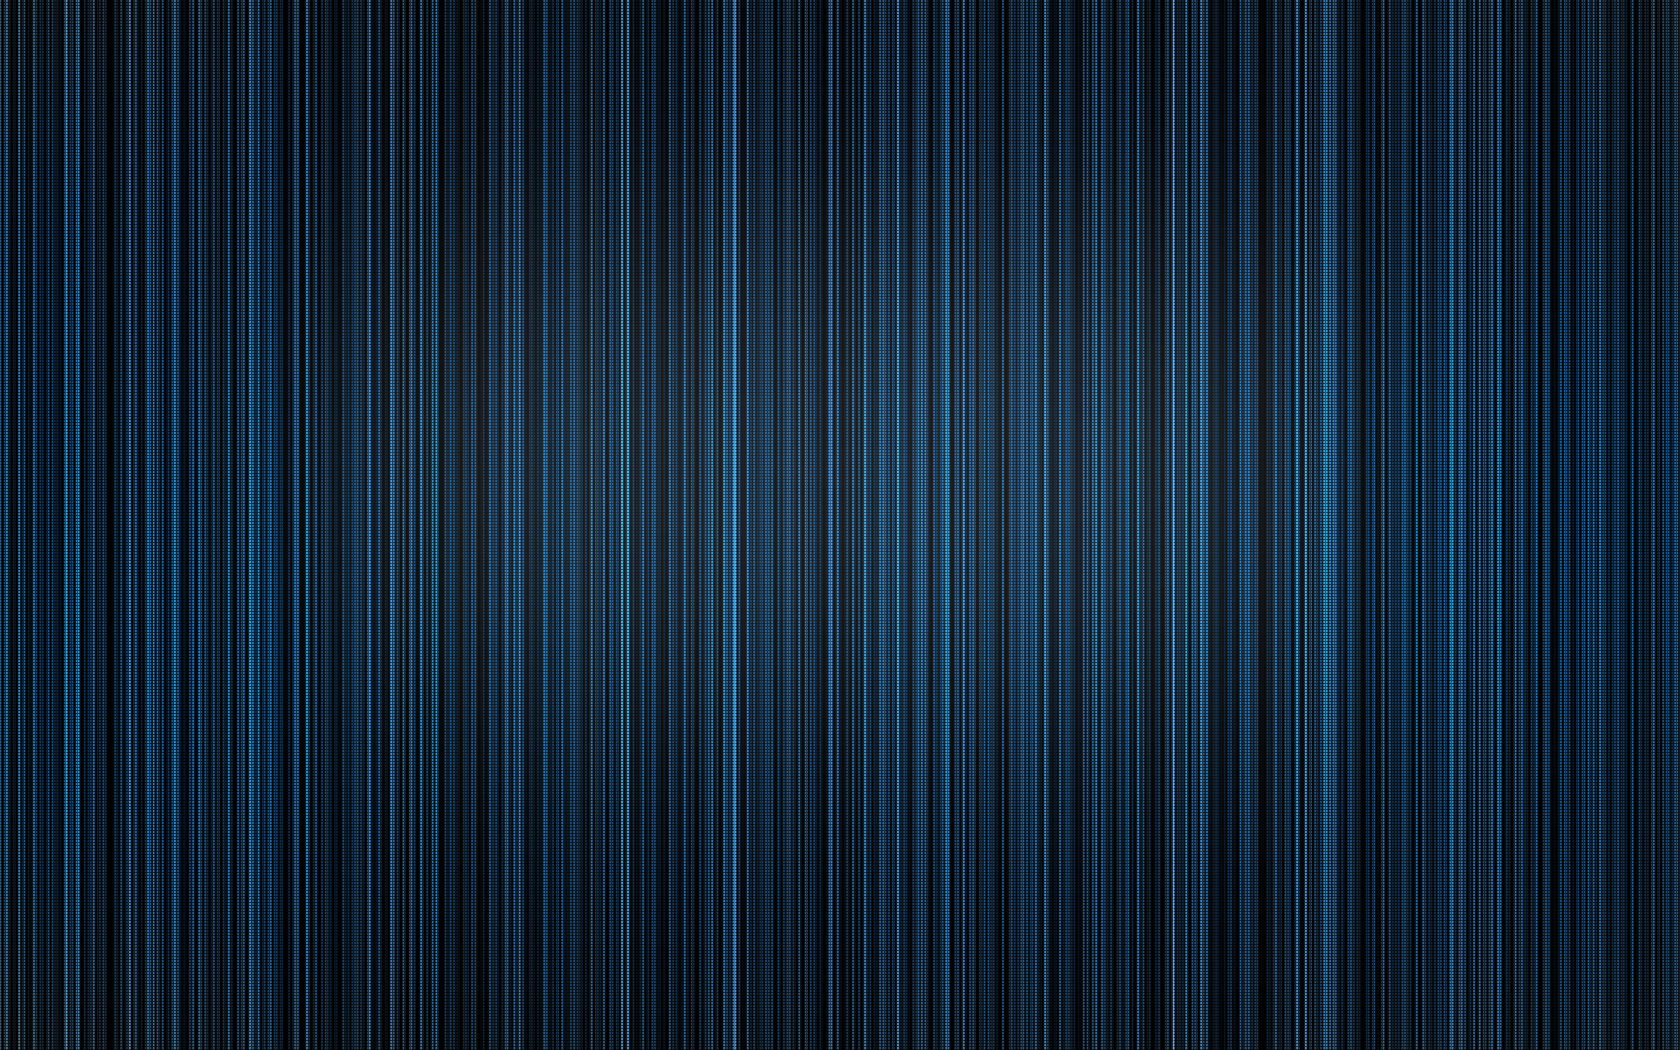 Abstract Striped Wallpaper Texture